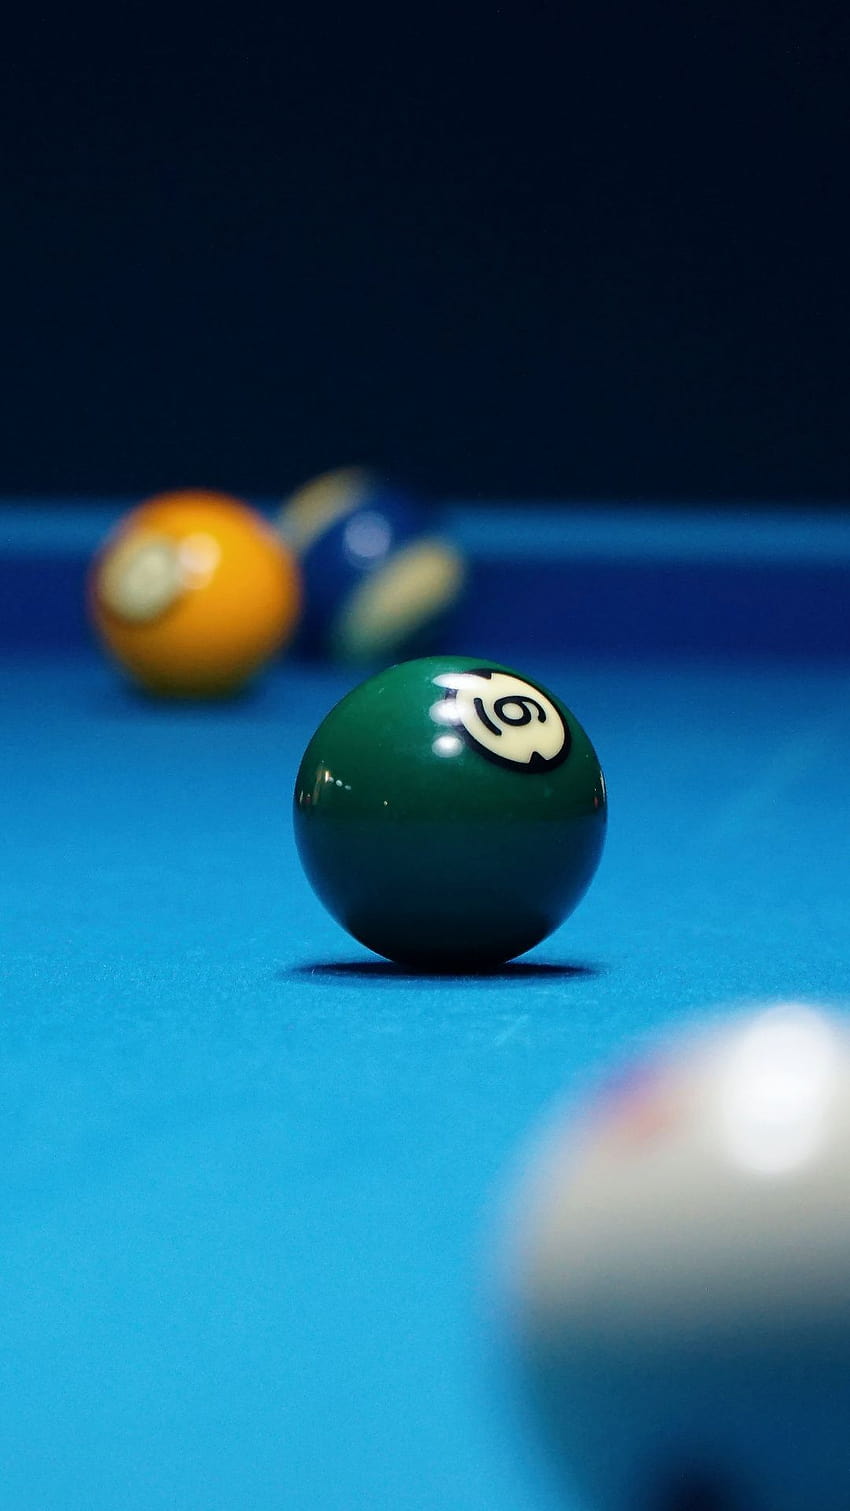 indoor games and sports, sports, snooker, pocket billiards, ball, snooker android HD phone wallpaper